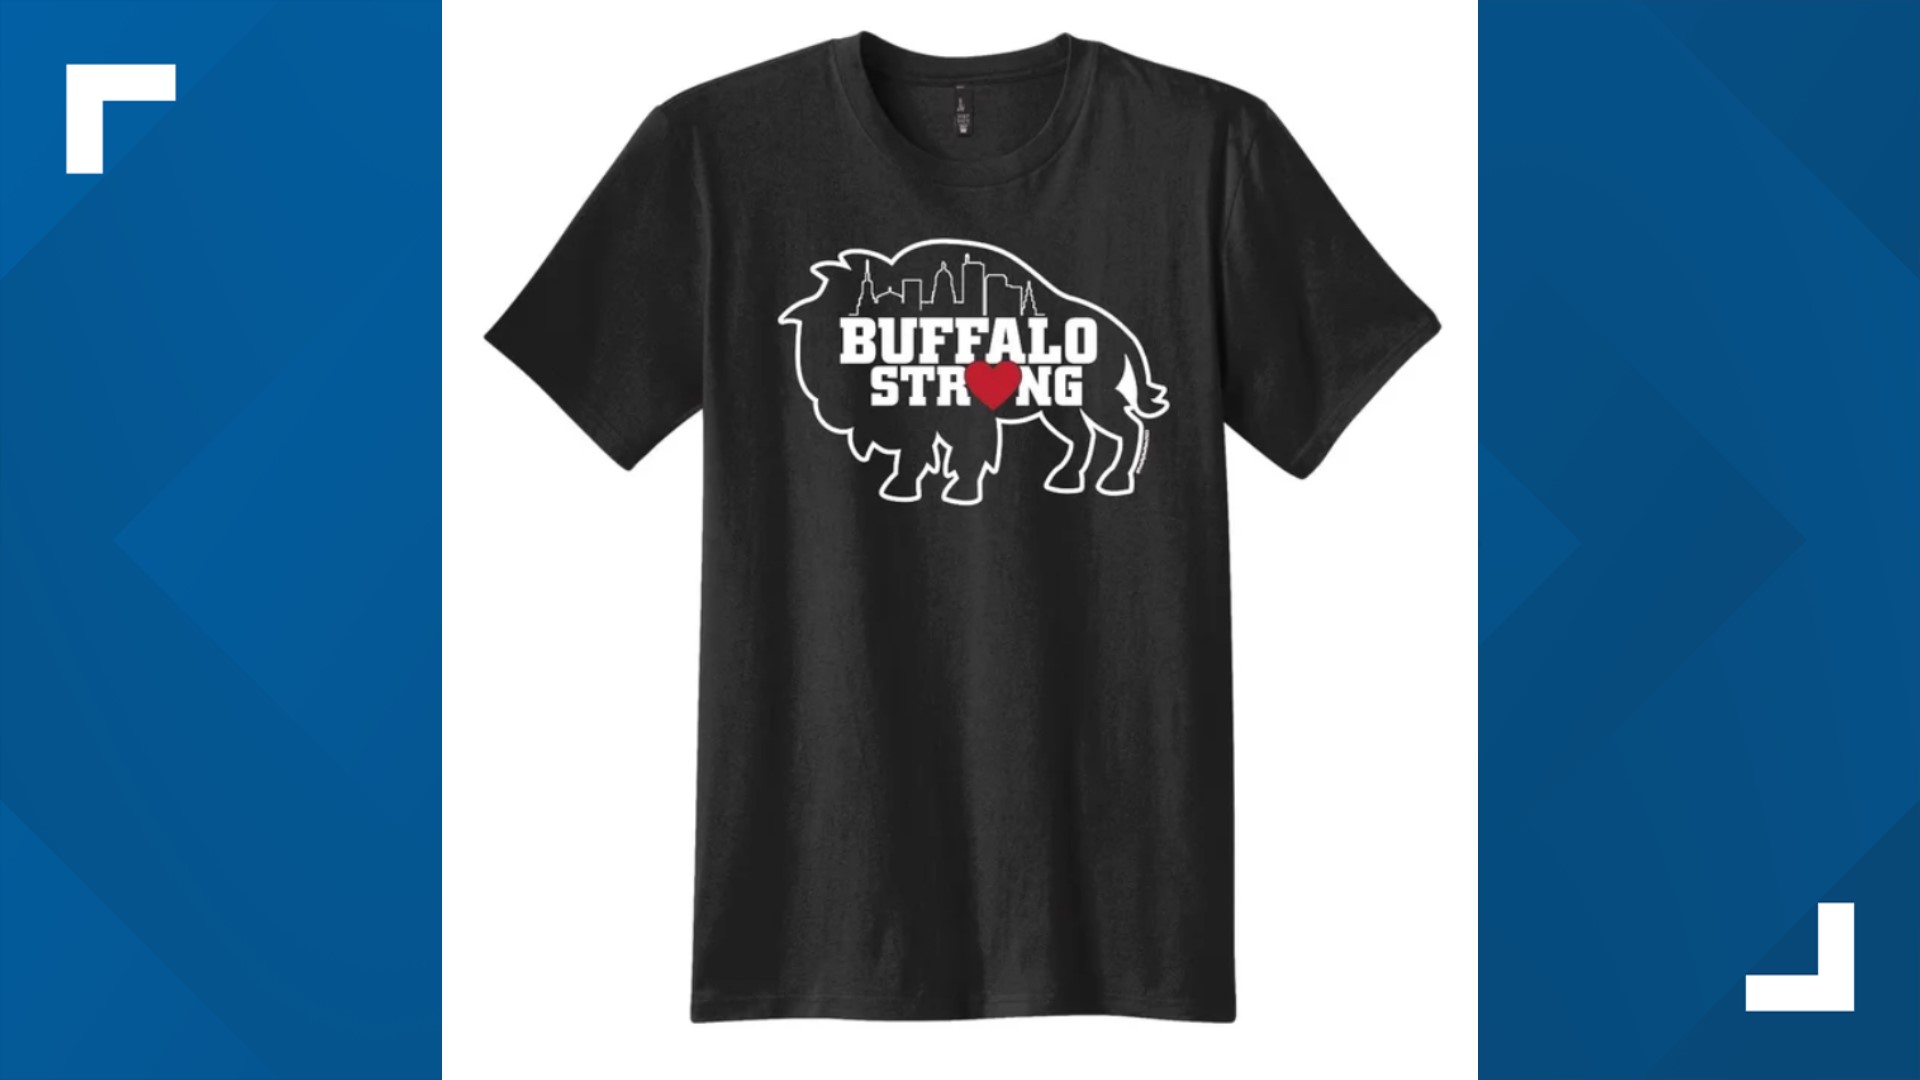 'Buffalo Strong' T-shirt from Totally Buffalo will raise funds for ...